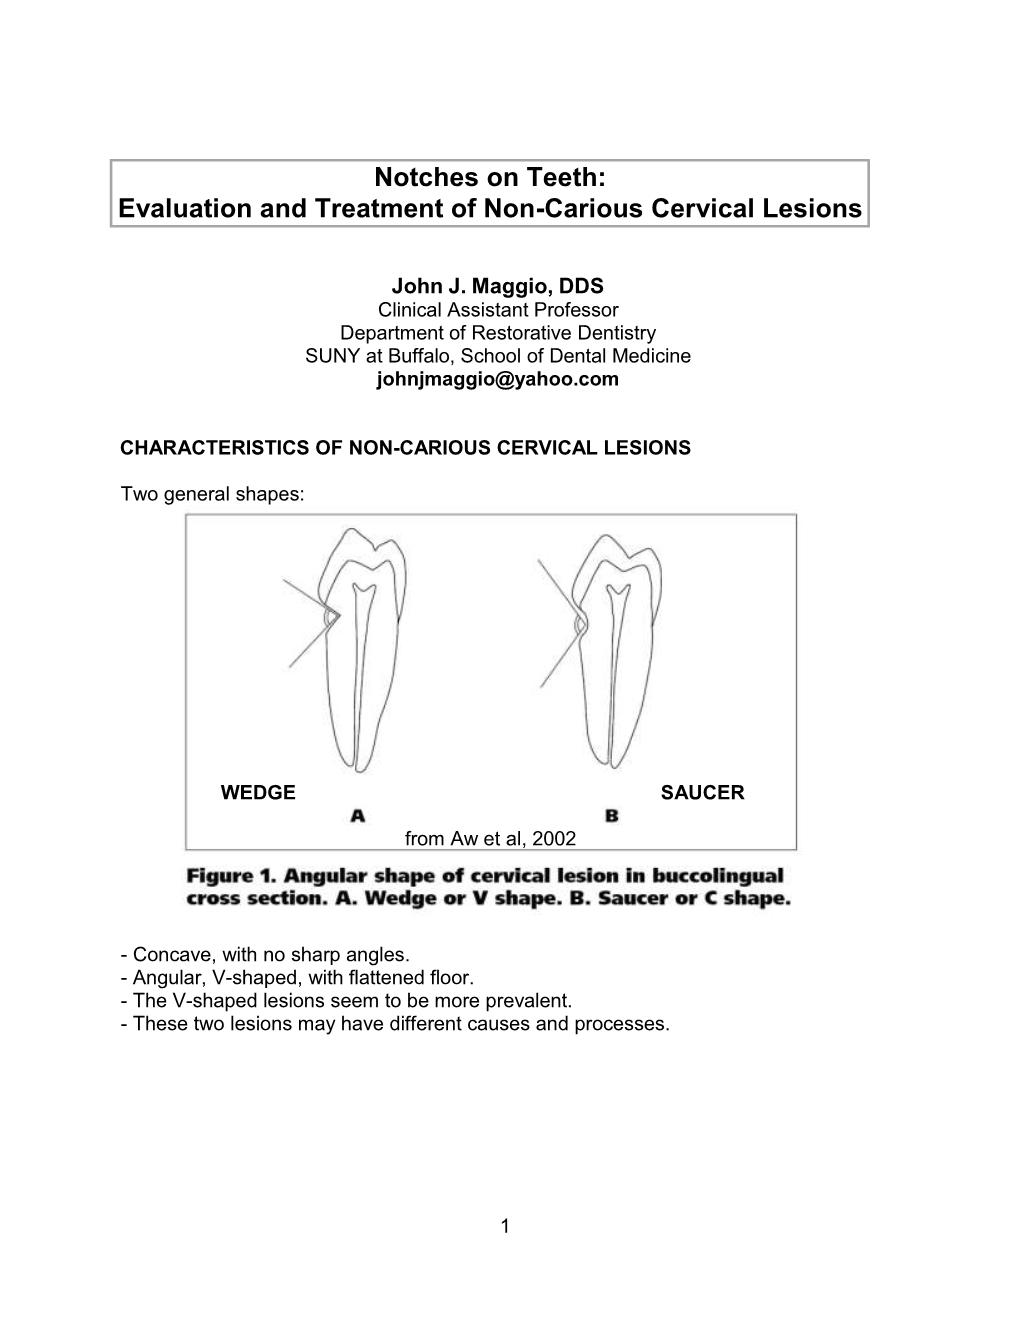 Evaluation and Treatment of Non-Carious Cervical Lesions